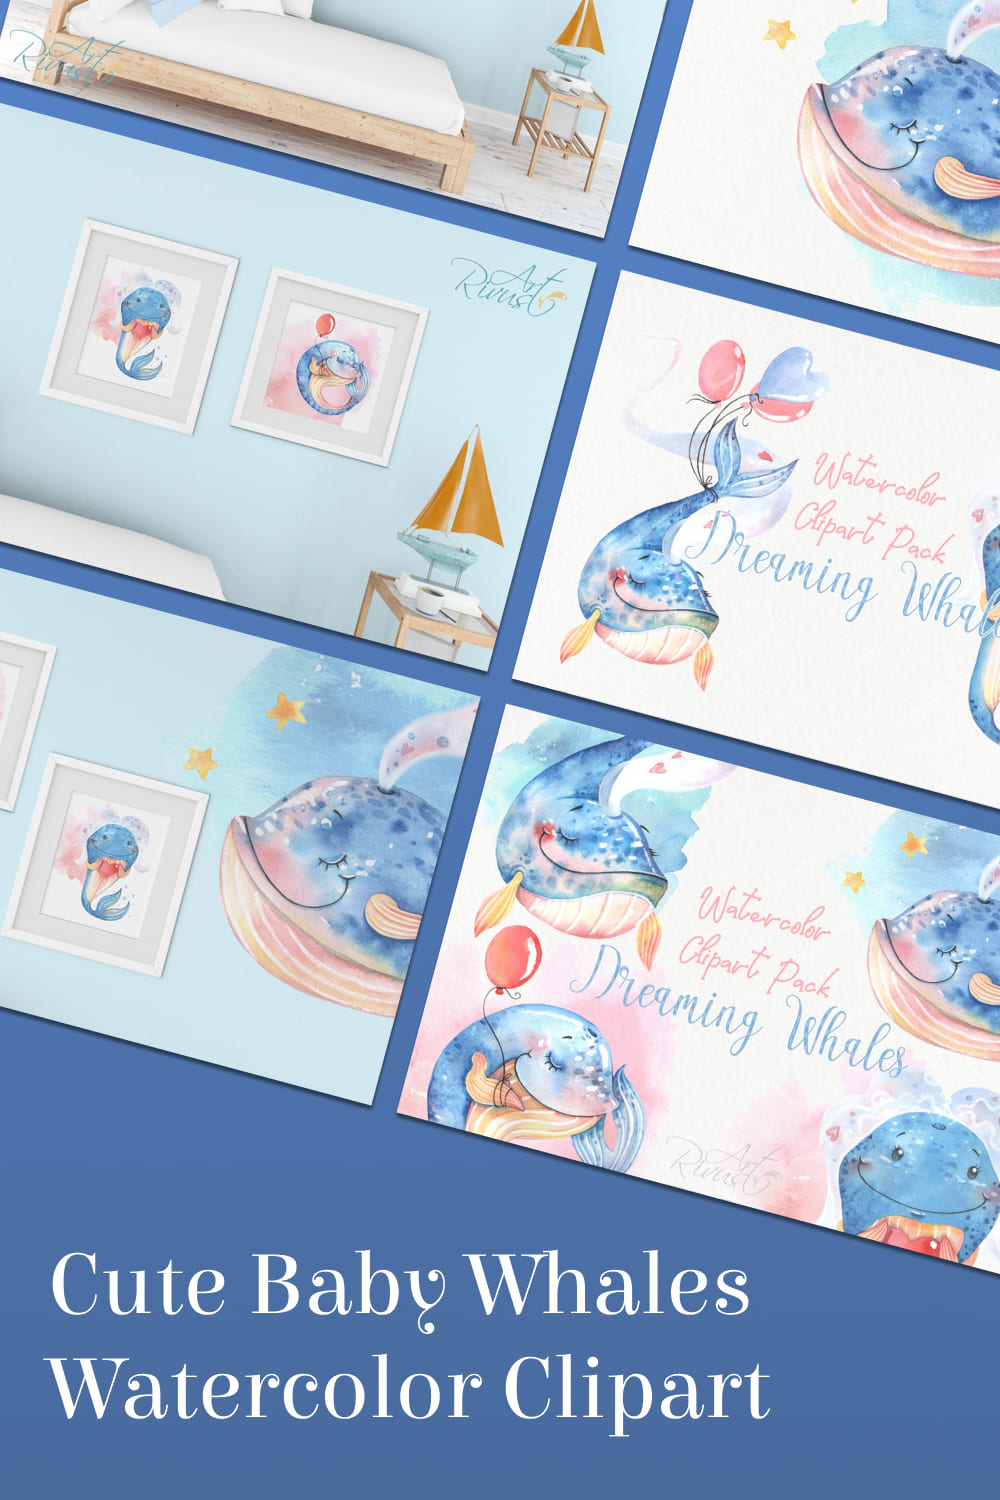 cute baby whales watercolor clipart collection.